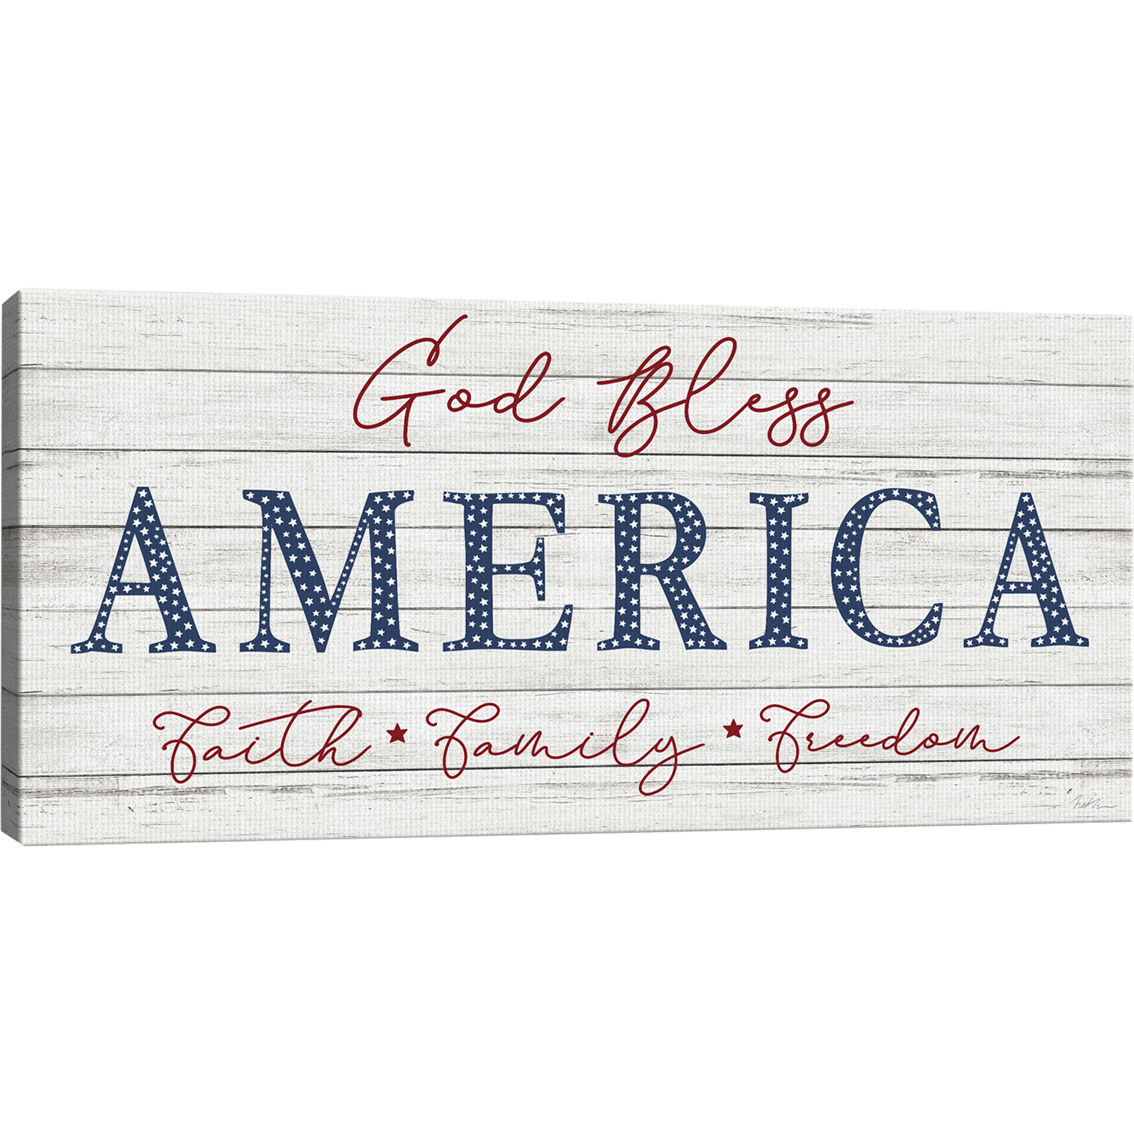 Inkstry In Wood Grain God Bless America Canvas Giclee Wall Art - Image 2 of 3